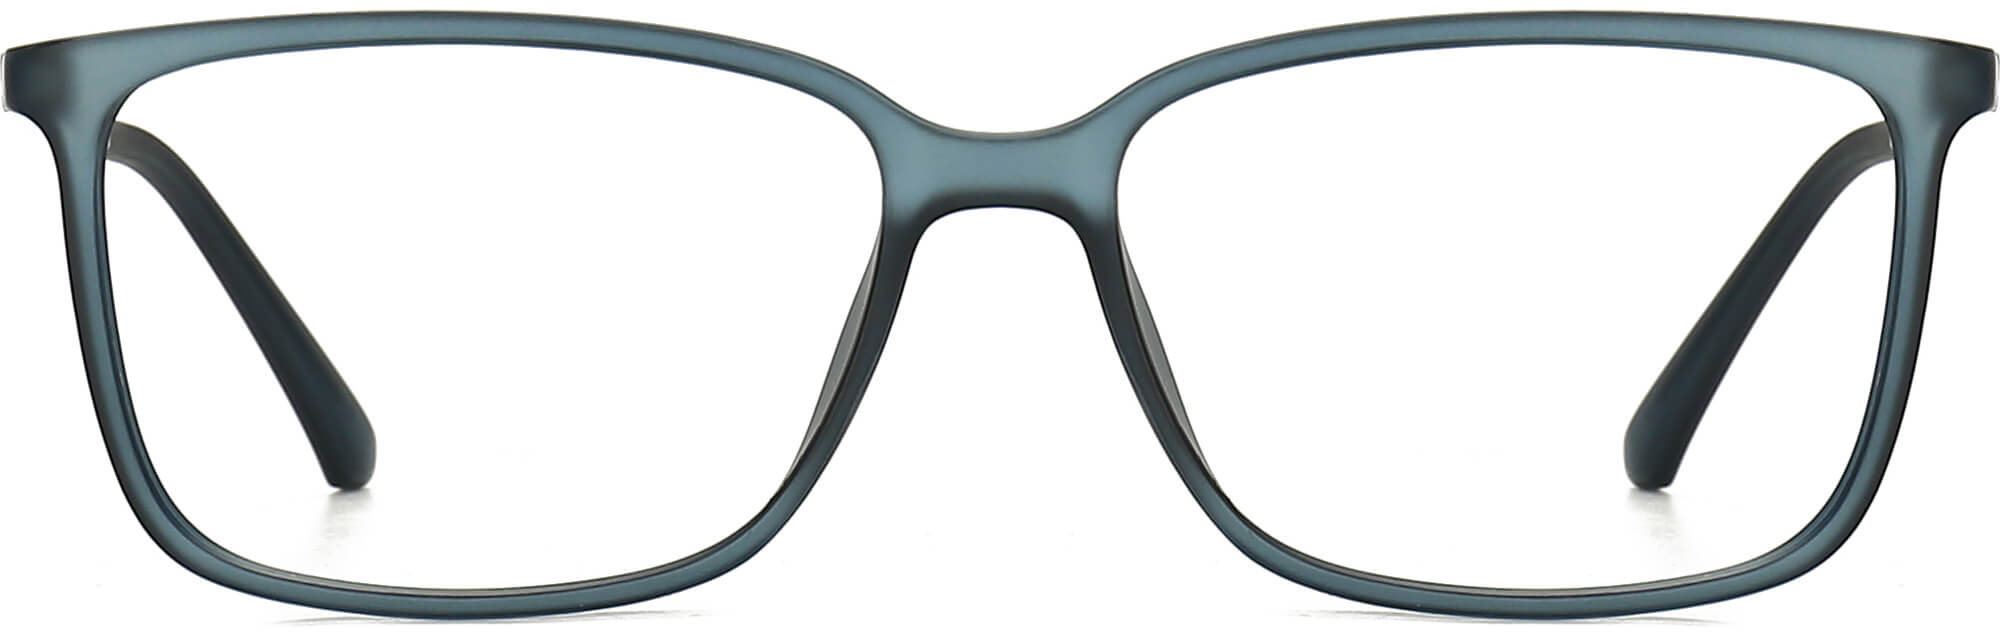 Ronald Square Blue Eyeglasses from ANRRI